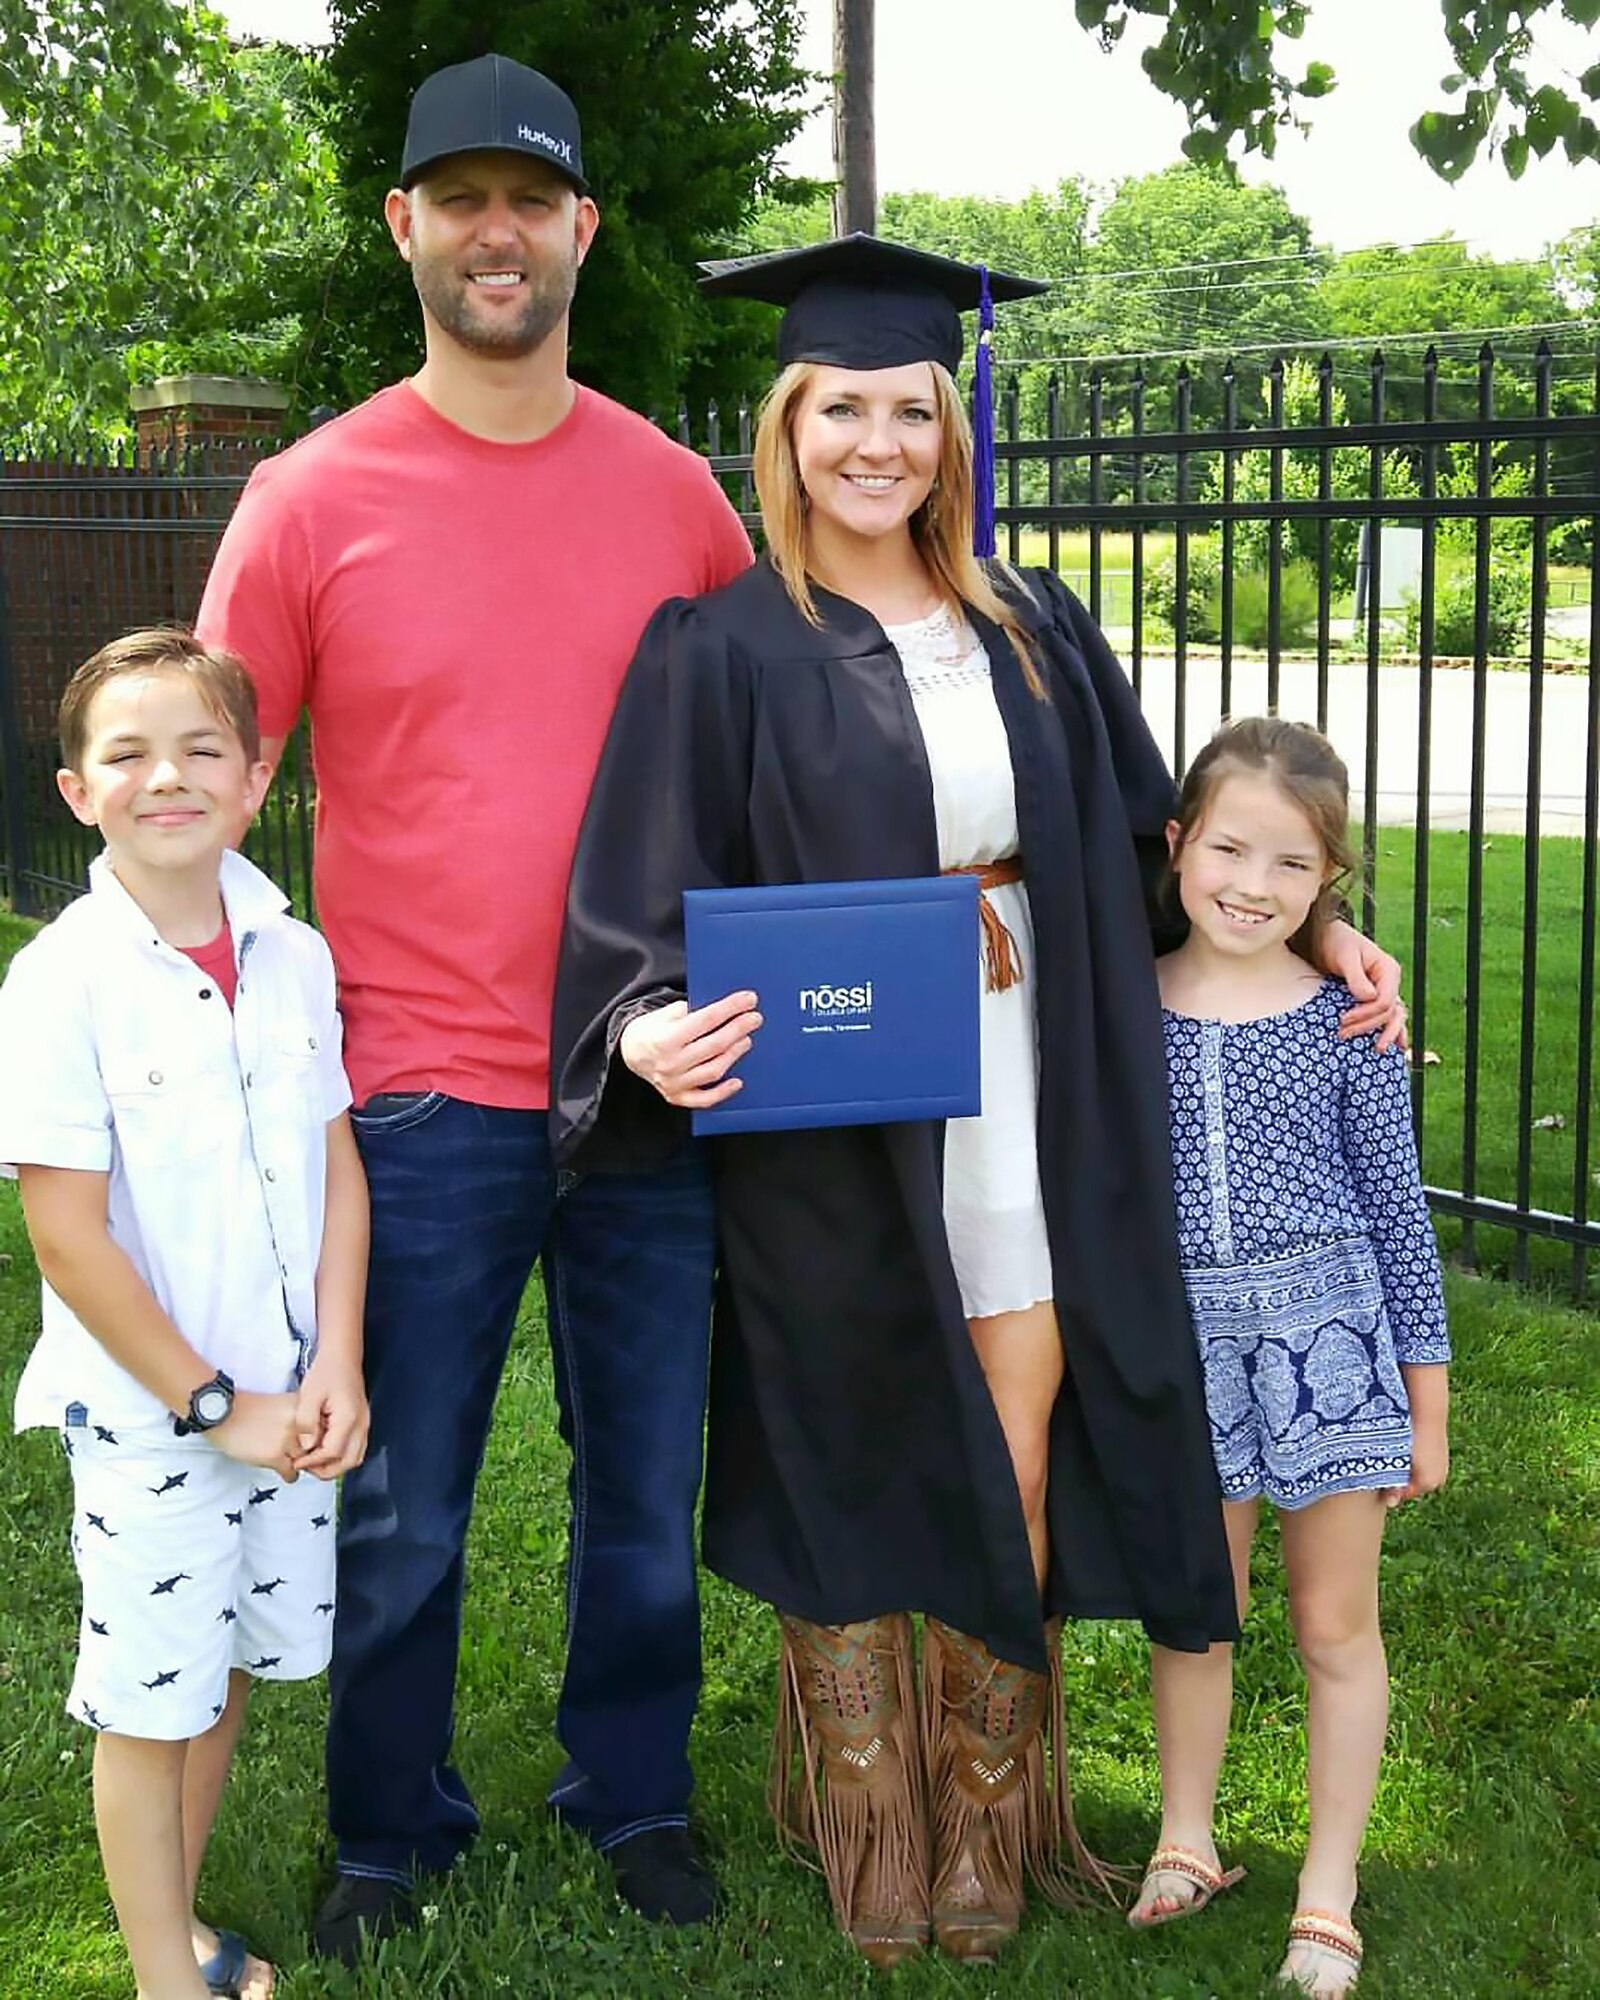 Eric Brumley, an AEDC outside machinist and technical sergeant with the 134th Air Refueling Wing Air National Guard, Knoxville, is a newlywed. He is pictured here with his wife Marti and their children, Isaac and Jianna Bare after Marti’s graduation from Nossi College of Art June 5. Brumley works in the Aeropropulsion Systems Test Facility. He will retire from the ANG Jan. 4, 2017. (Courtesy photo)